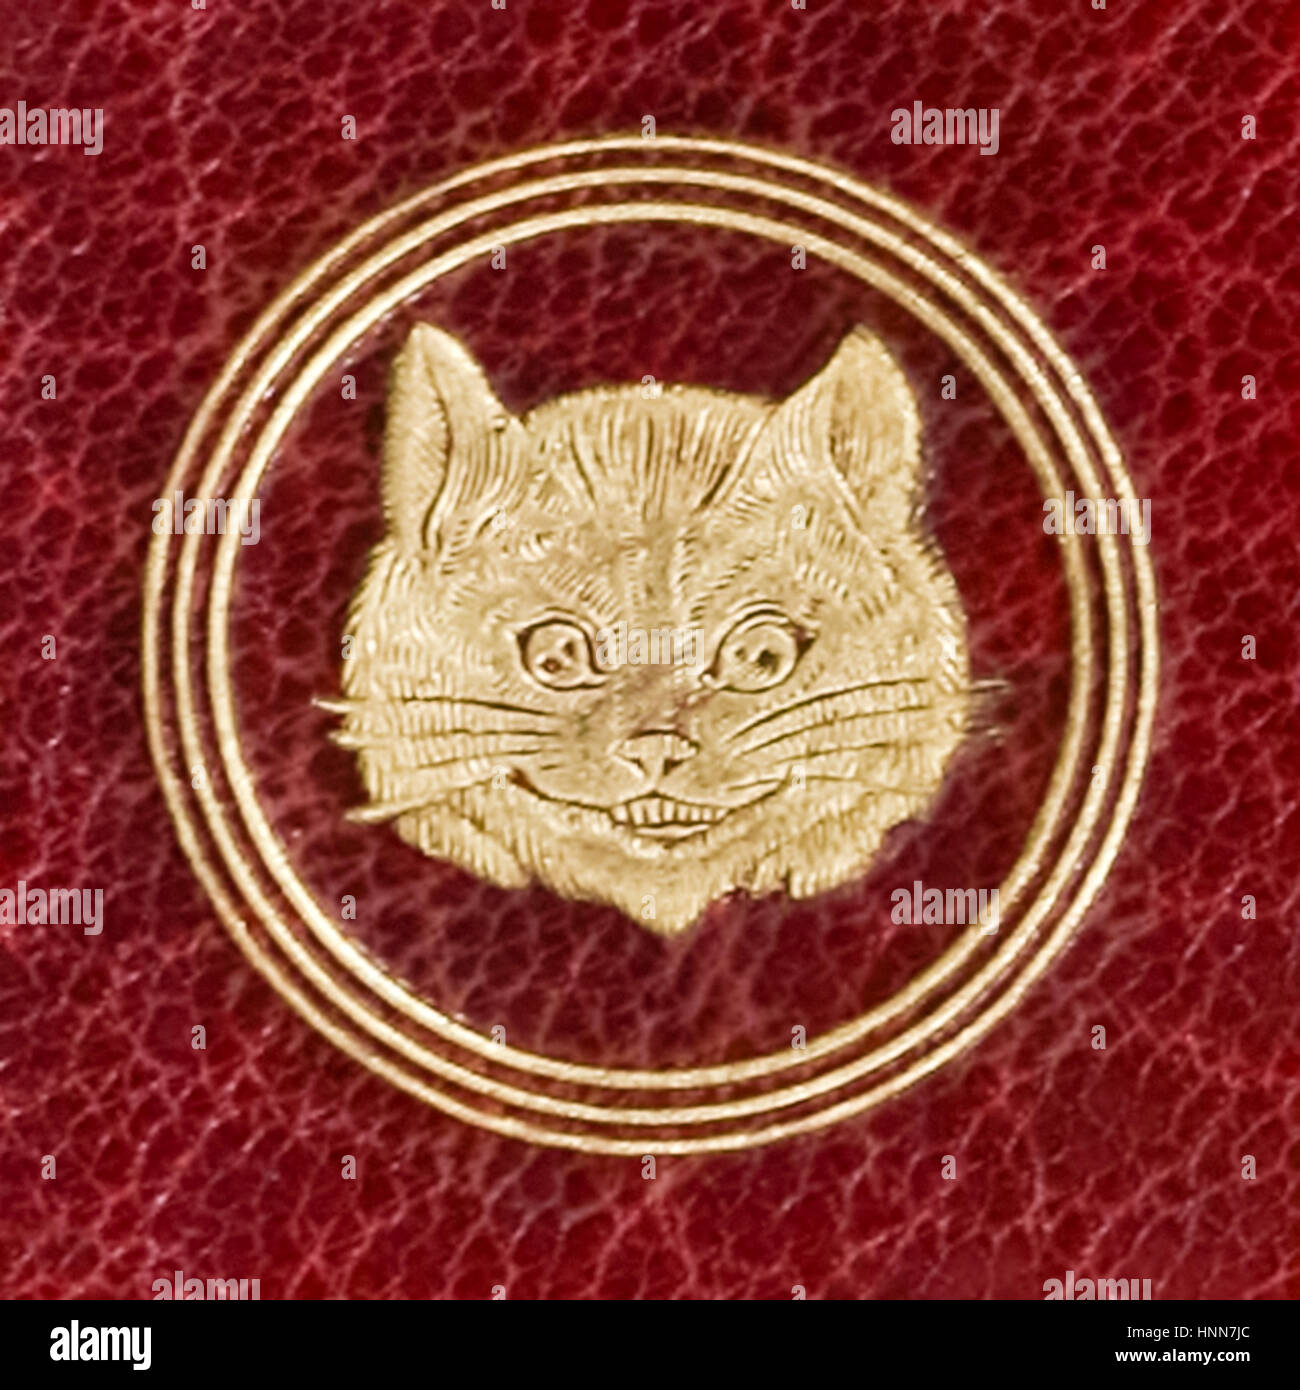 Close-up of the Cheshire Cat embossed on the back cover of a burgundy Morocco leather edition of ‘Alice’s Adventures in Wonderland’ by Lewis Carroll (1832-1898) published in 1865. Stock Photo